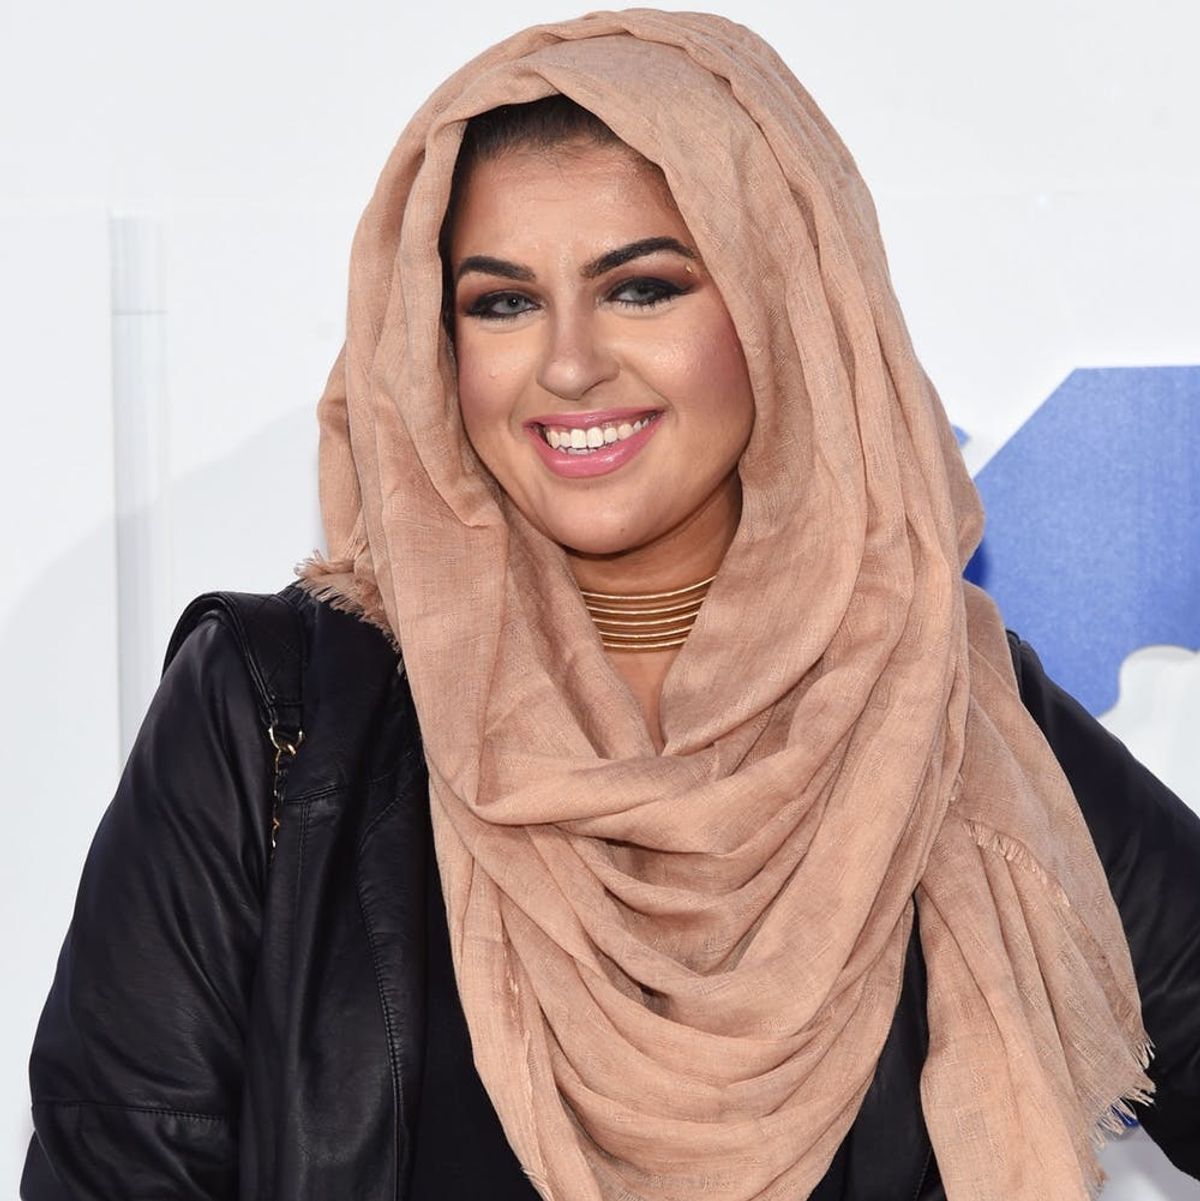 How to Be an Ally to the Muslim Women in Your Life